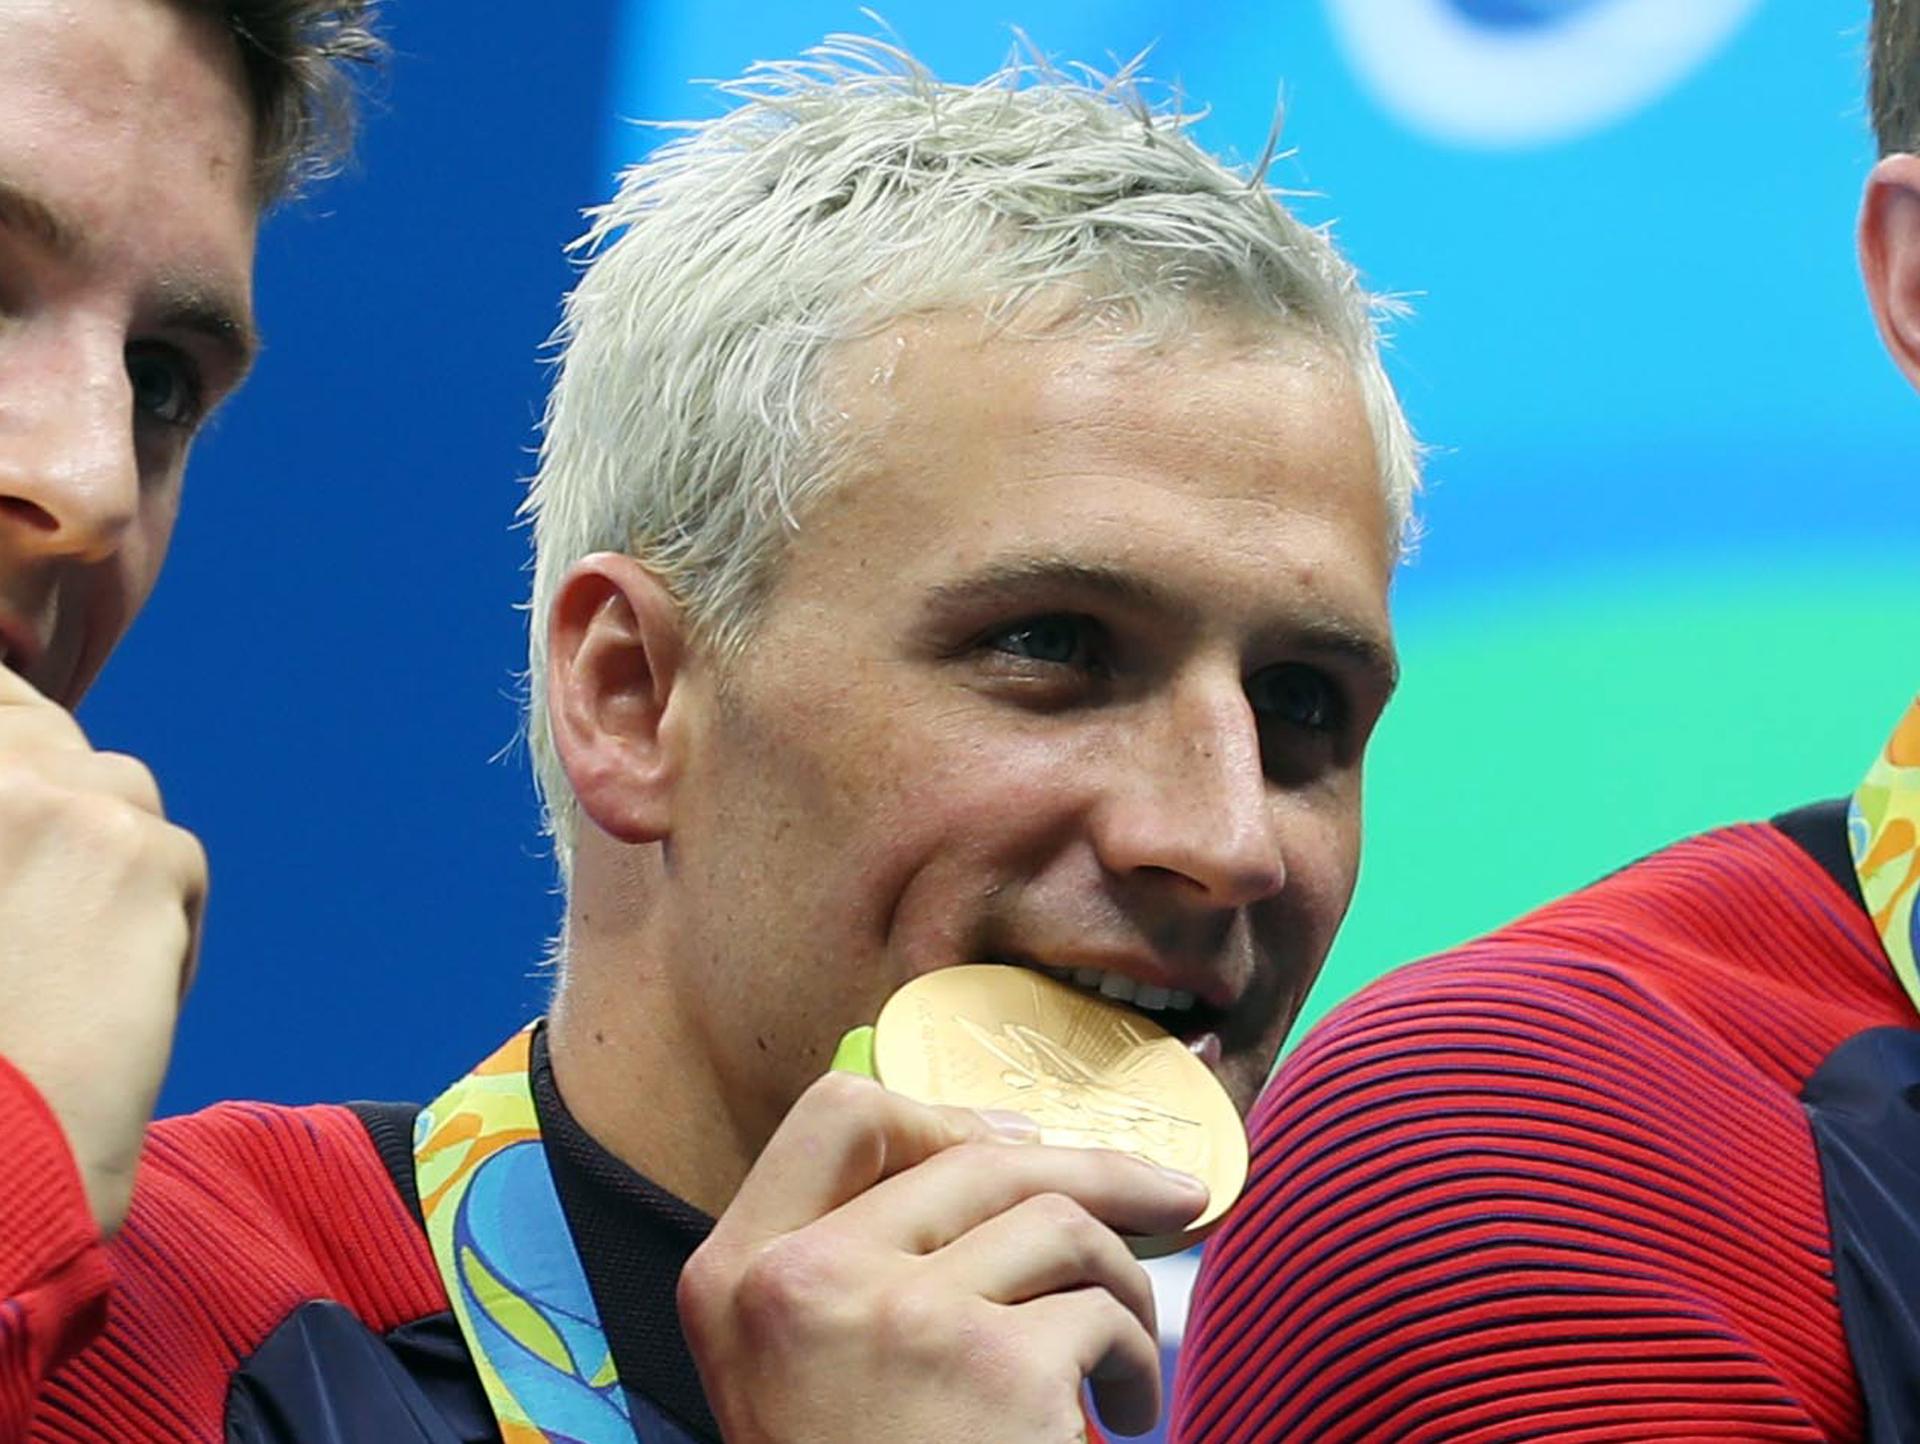 Ryan Lochte, the US swimmer, bites his Olympic gold medal in Rio de Janeiro.